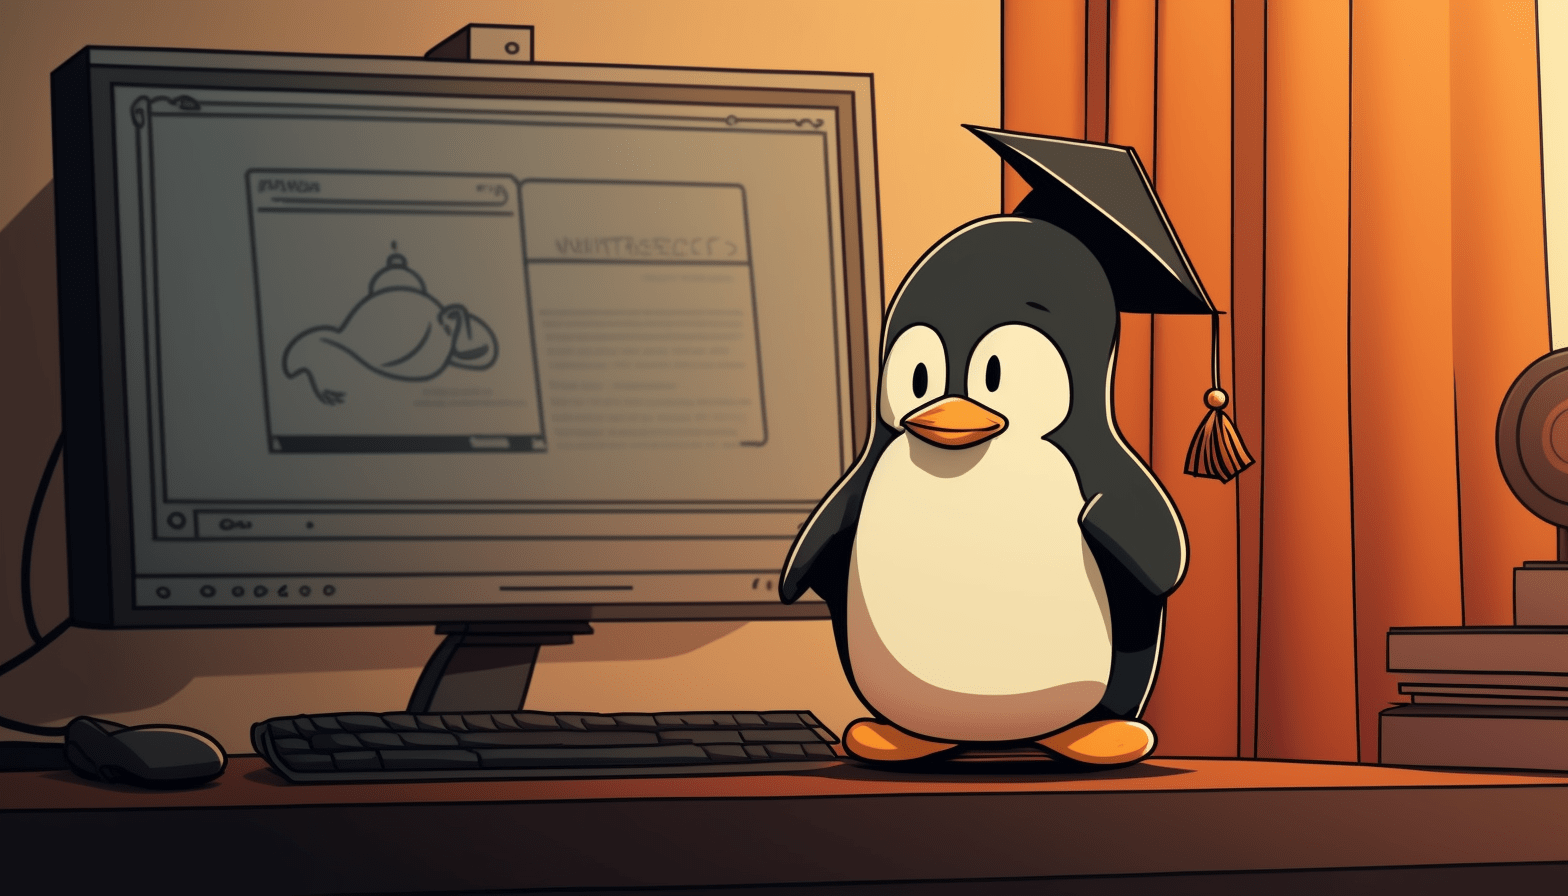 A cartoon image of a penguin with a graduation cap, holding a diploma and standing in front of a computer with a Linux desktop environment in the background.